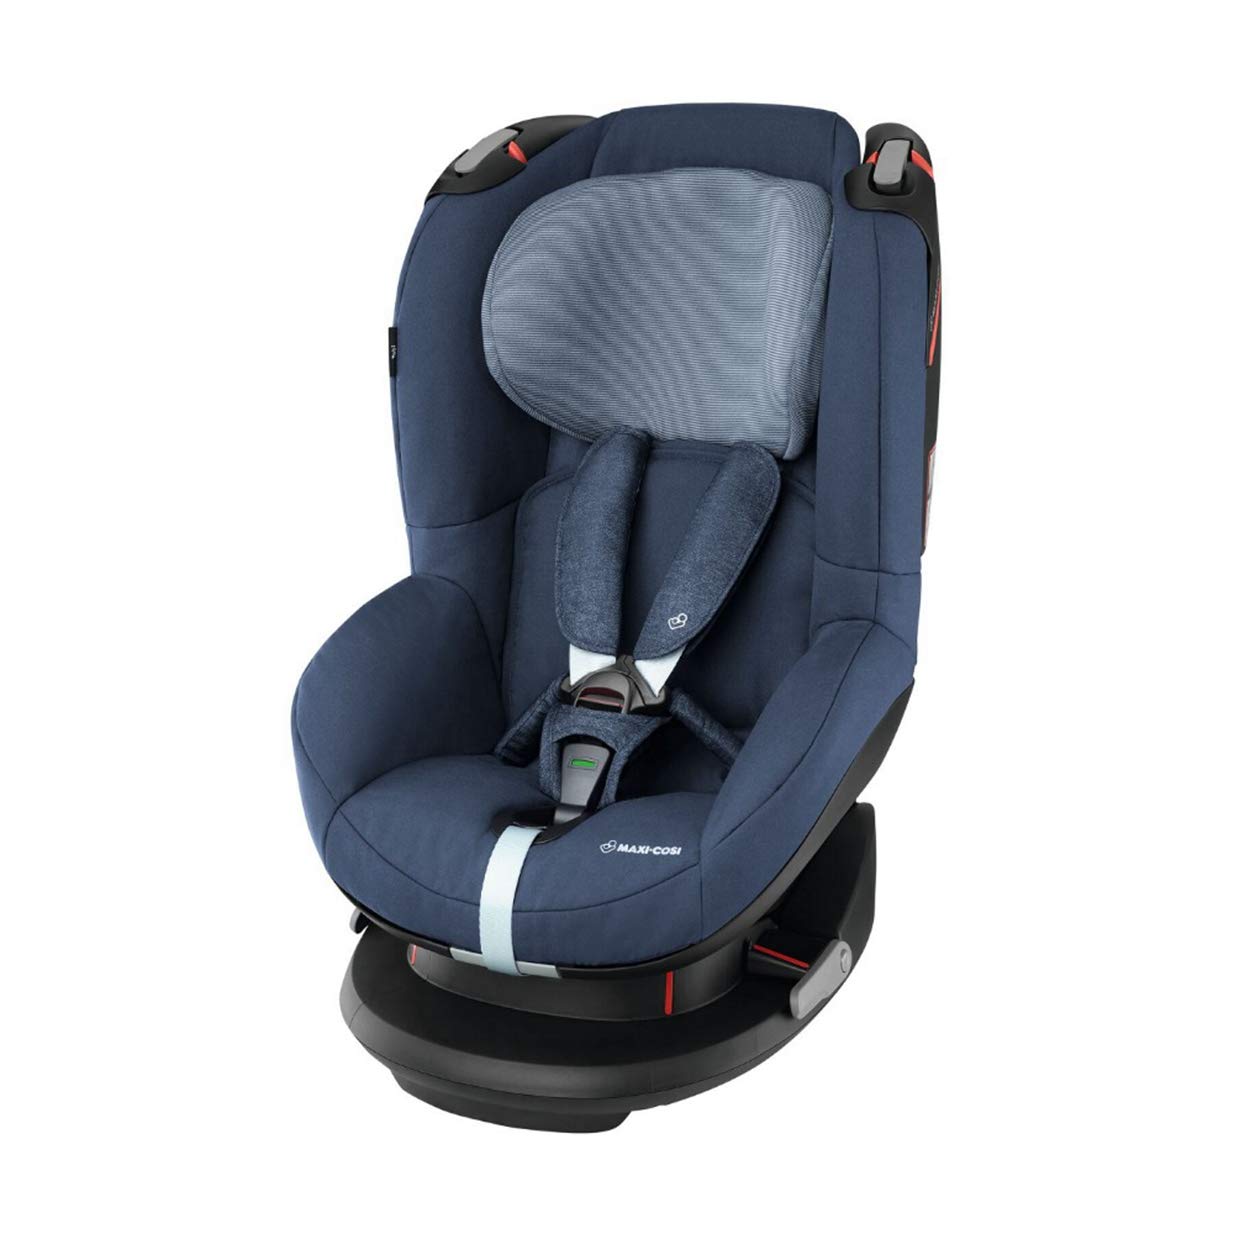 Maxi-Cosi Tobi Padded Child Car Seat with 5 comfortable sitting and lying positions, size 1, incl. \"Easy-In\" belt system (9-18 kg), usable from approx. 9 months to 4 years